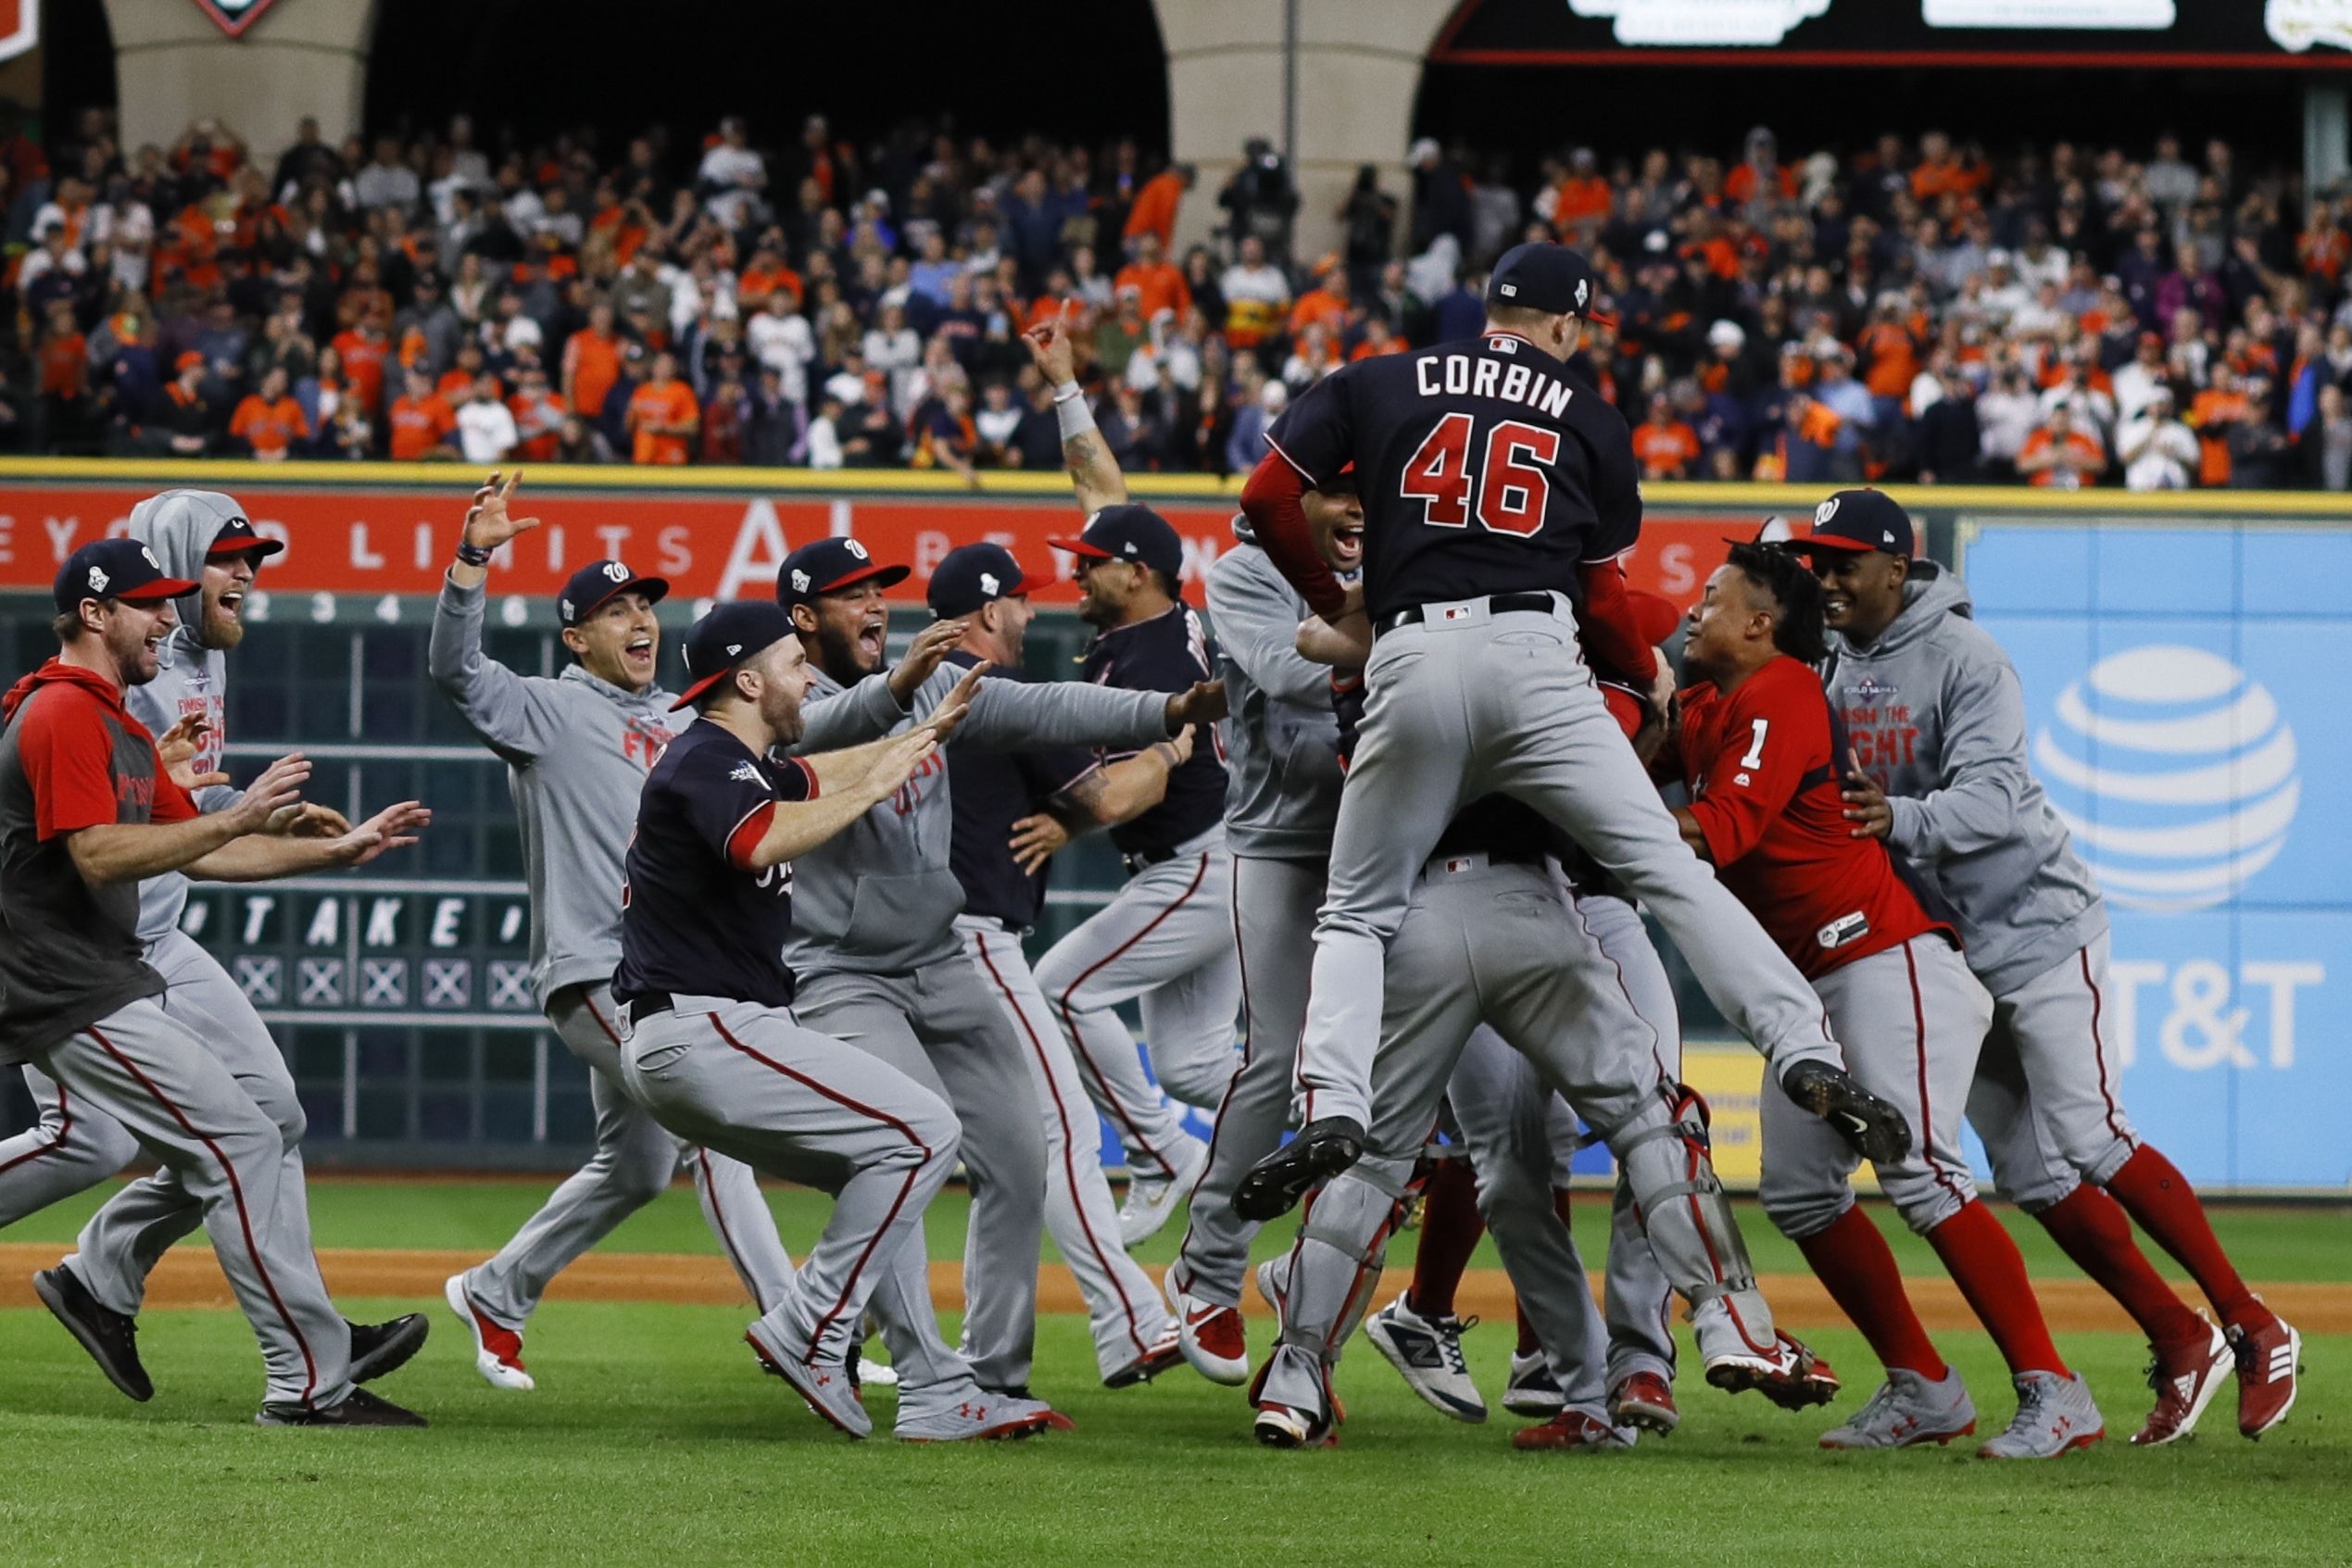 Fight finished: Washington Nationals win their first World Series title